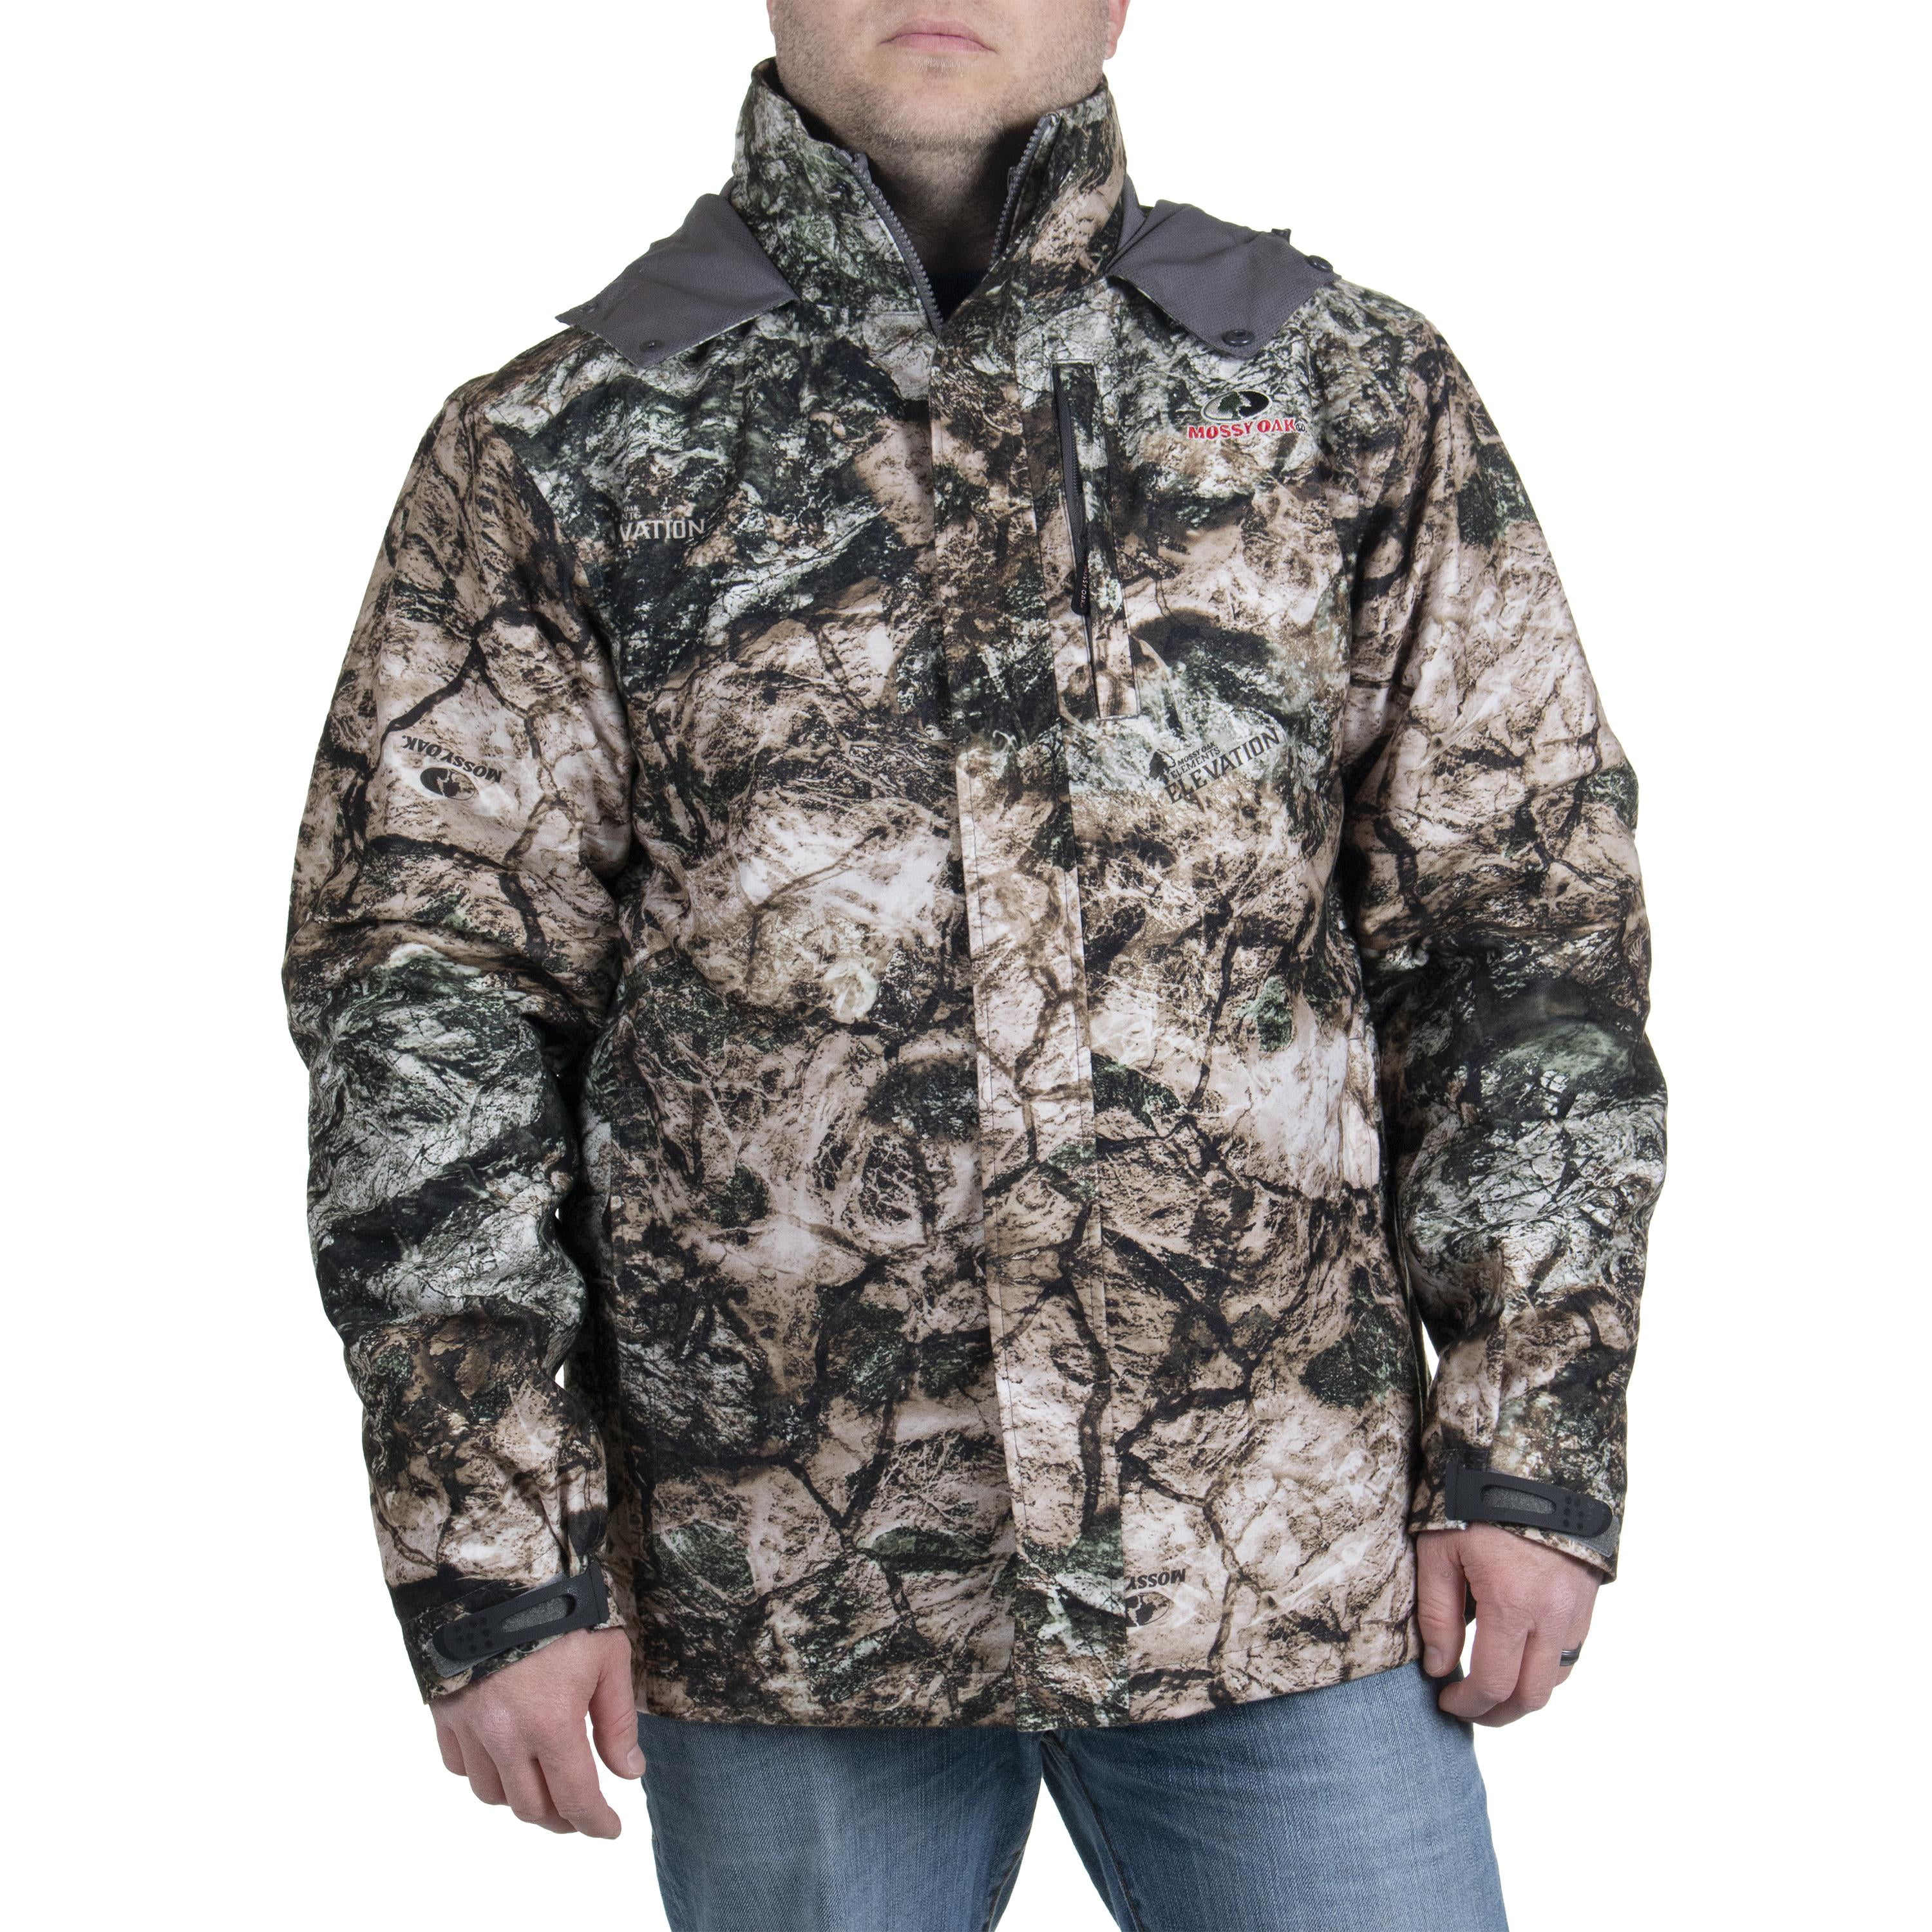 Mossy Oak Men's Country DNA Mid-Length Insulated Hunting Bomber Jacket - S-3xl Each